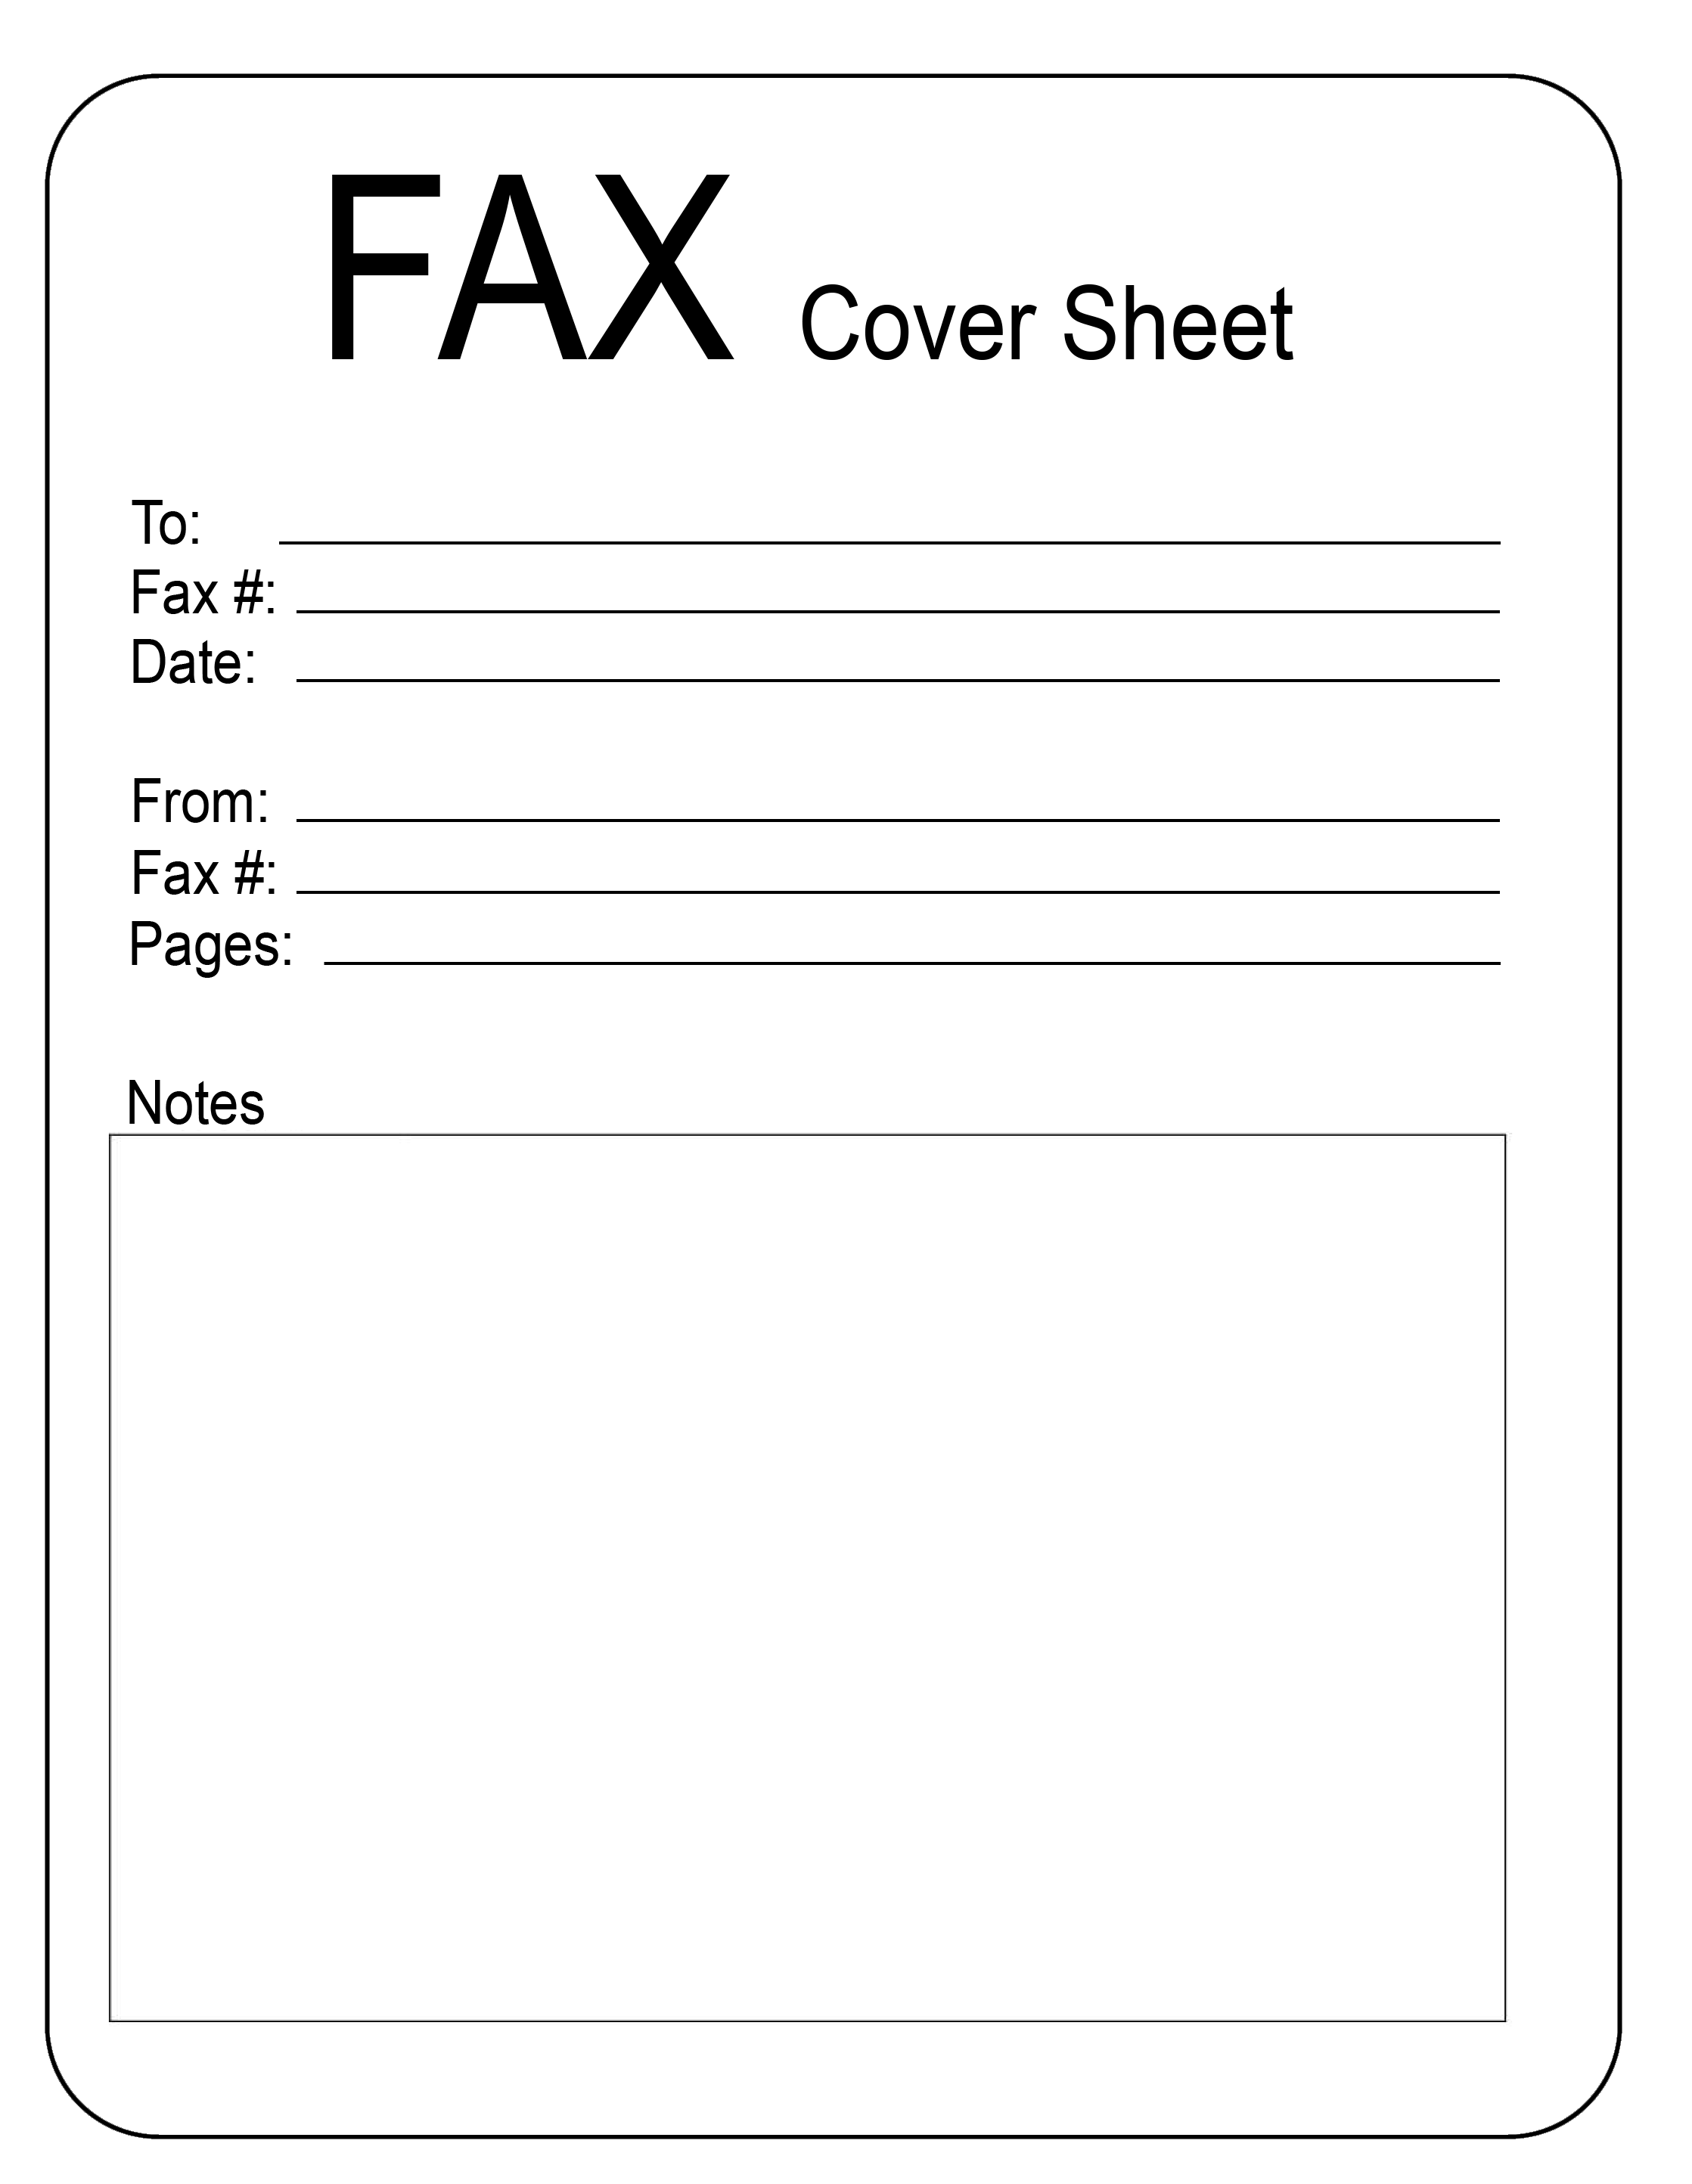 fax cover sheet download free pdf